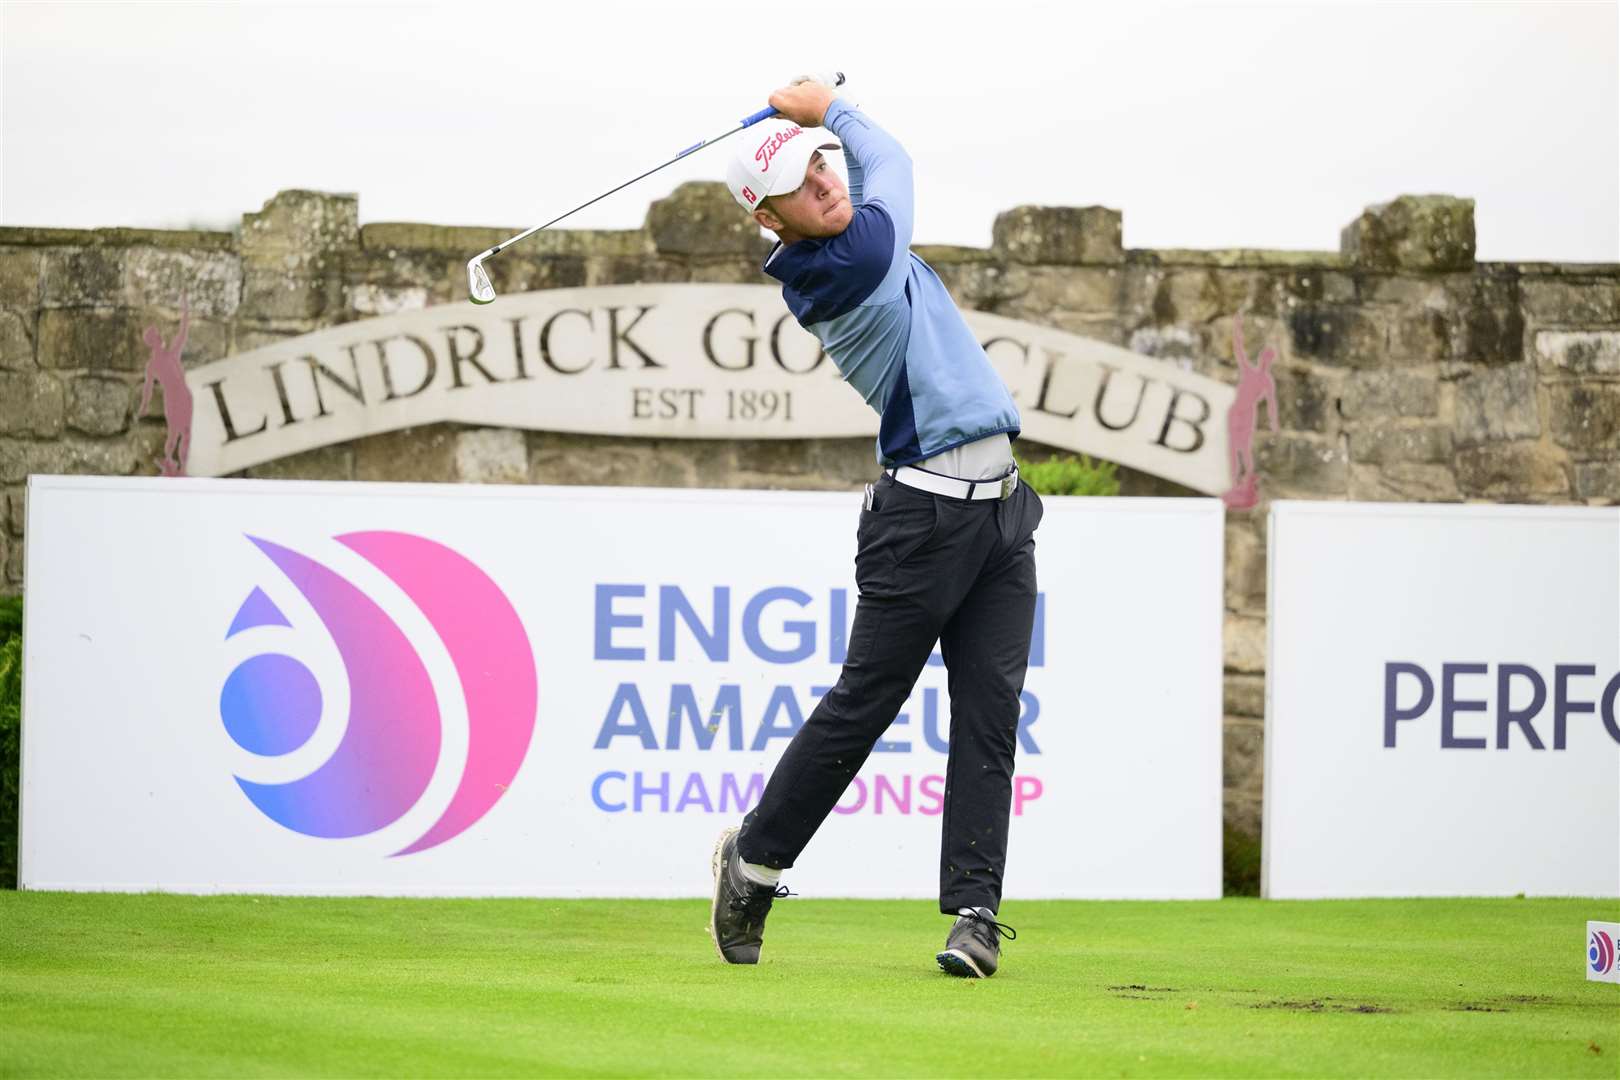 Jack Lee at the English Amateur Championship this year at Lindrick Golf Club. Picture: Leaderboard Photography/ England Golf